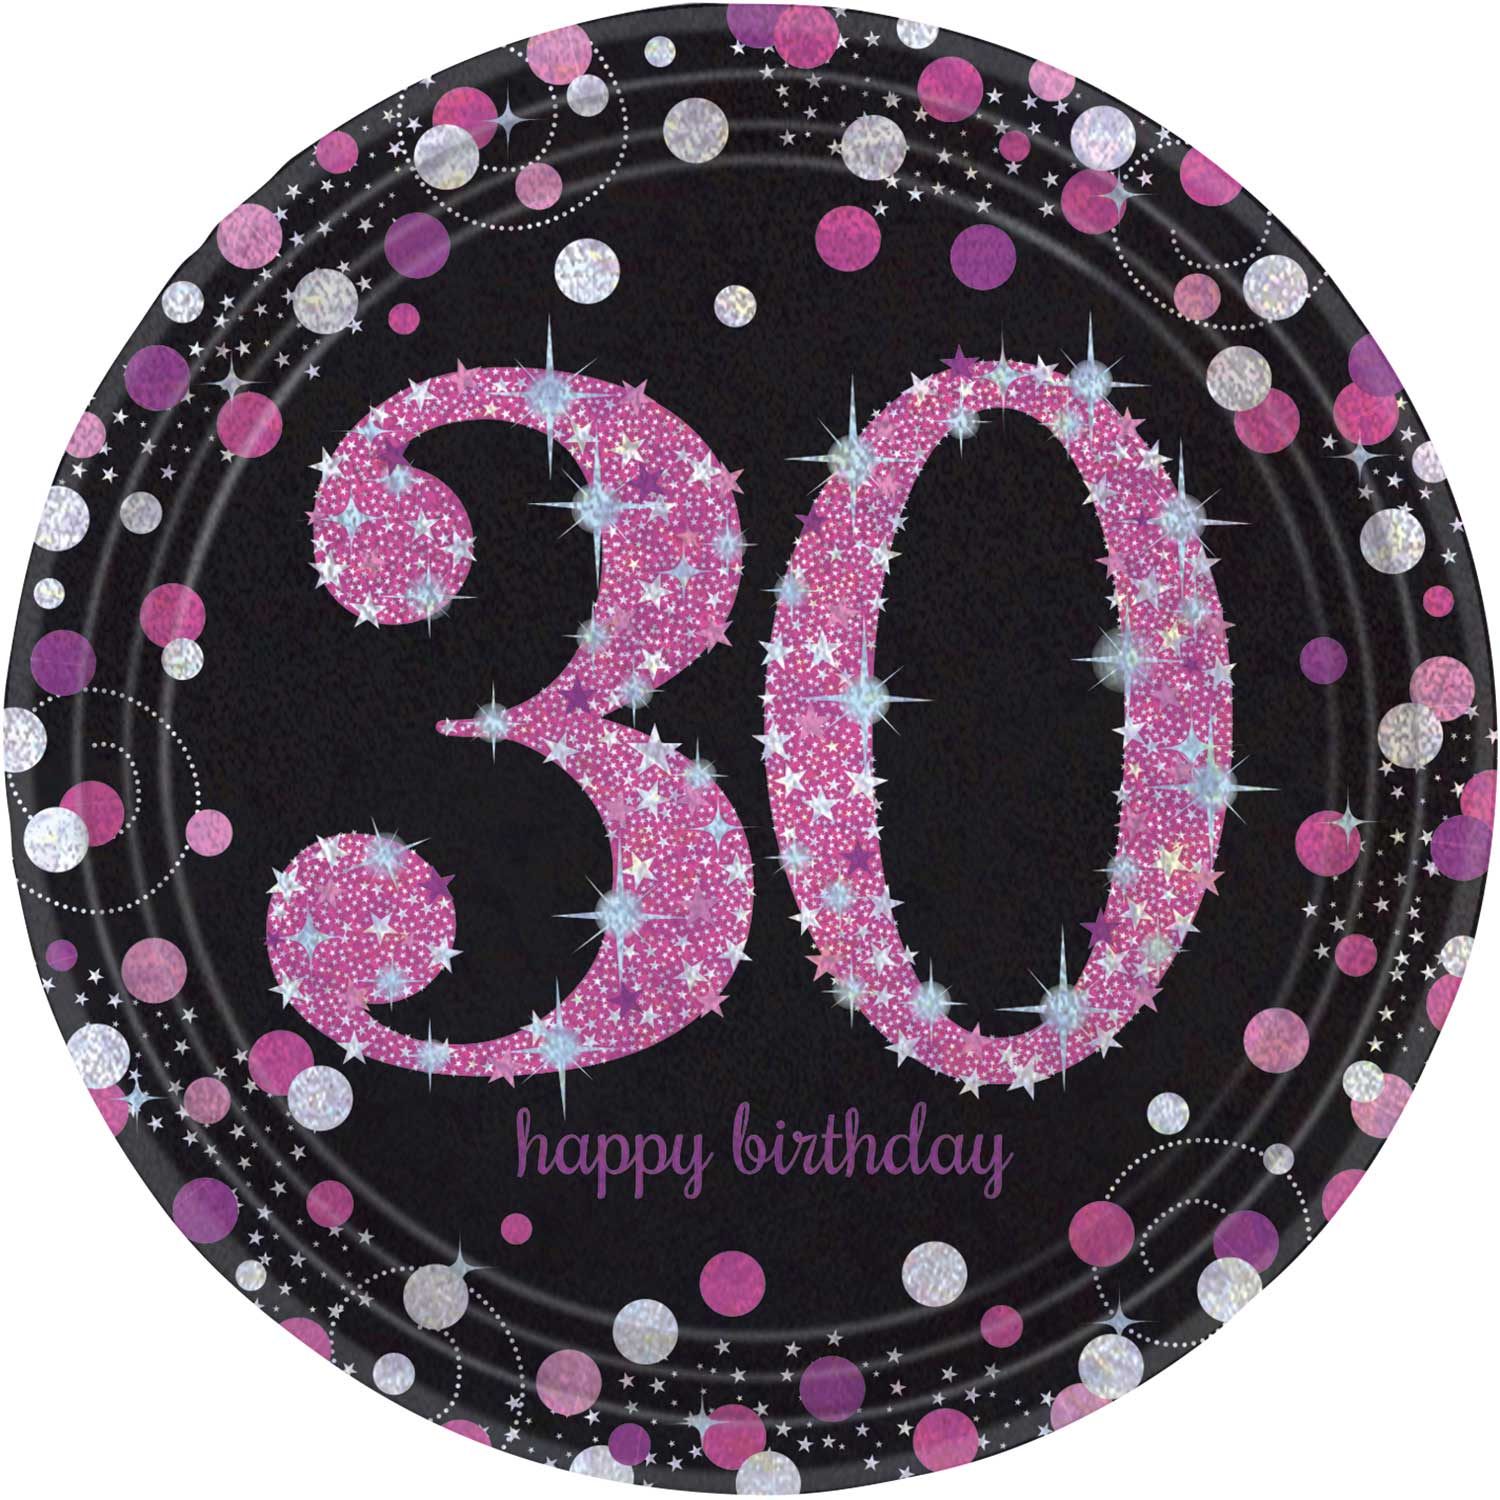 Pink Sparkling Celebration 30th Birthday Paper Plates - Pack of 8